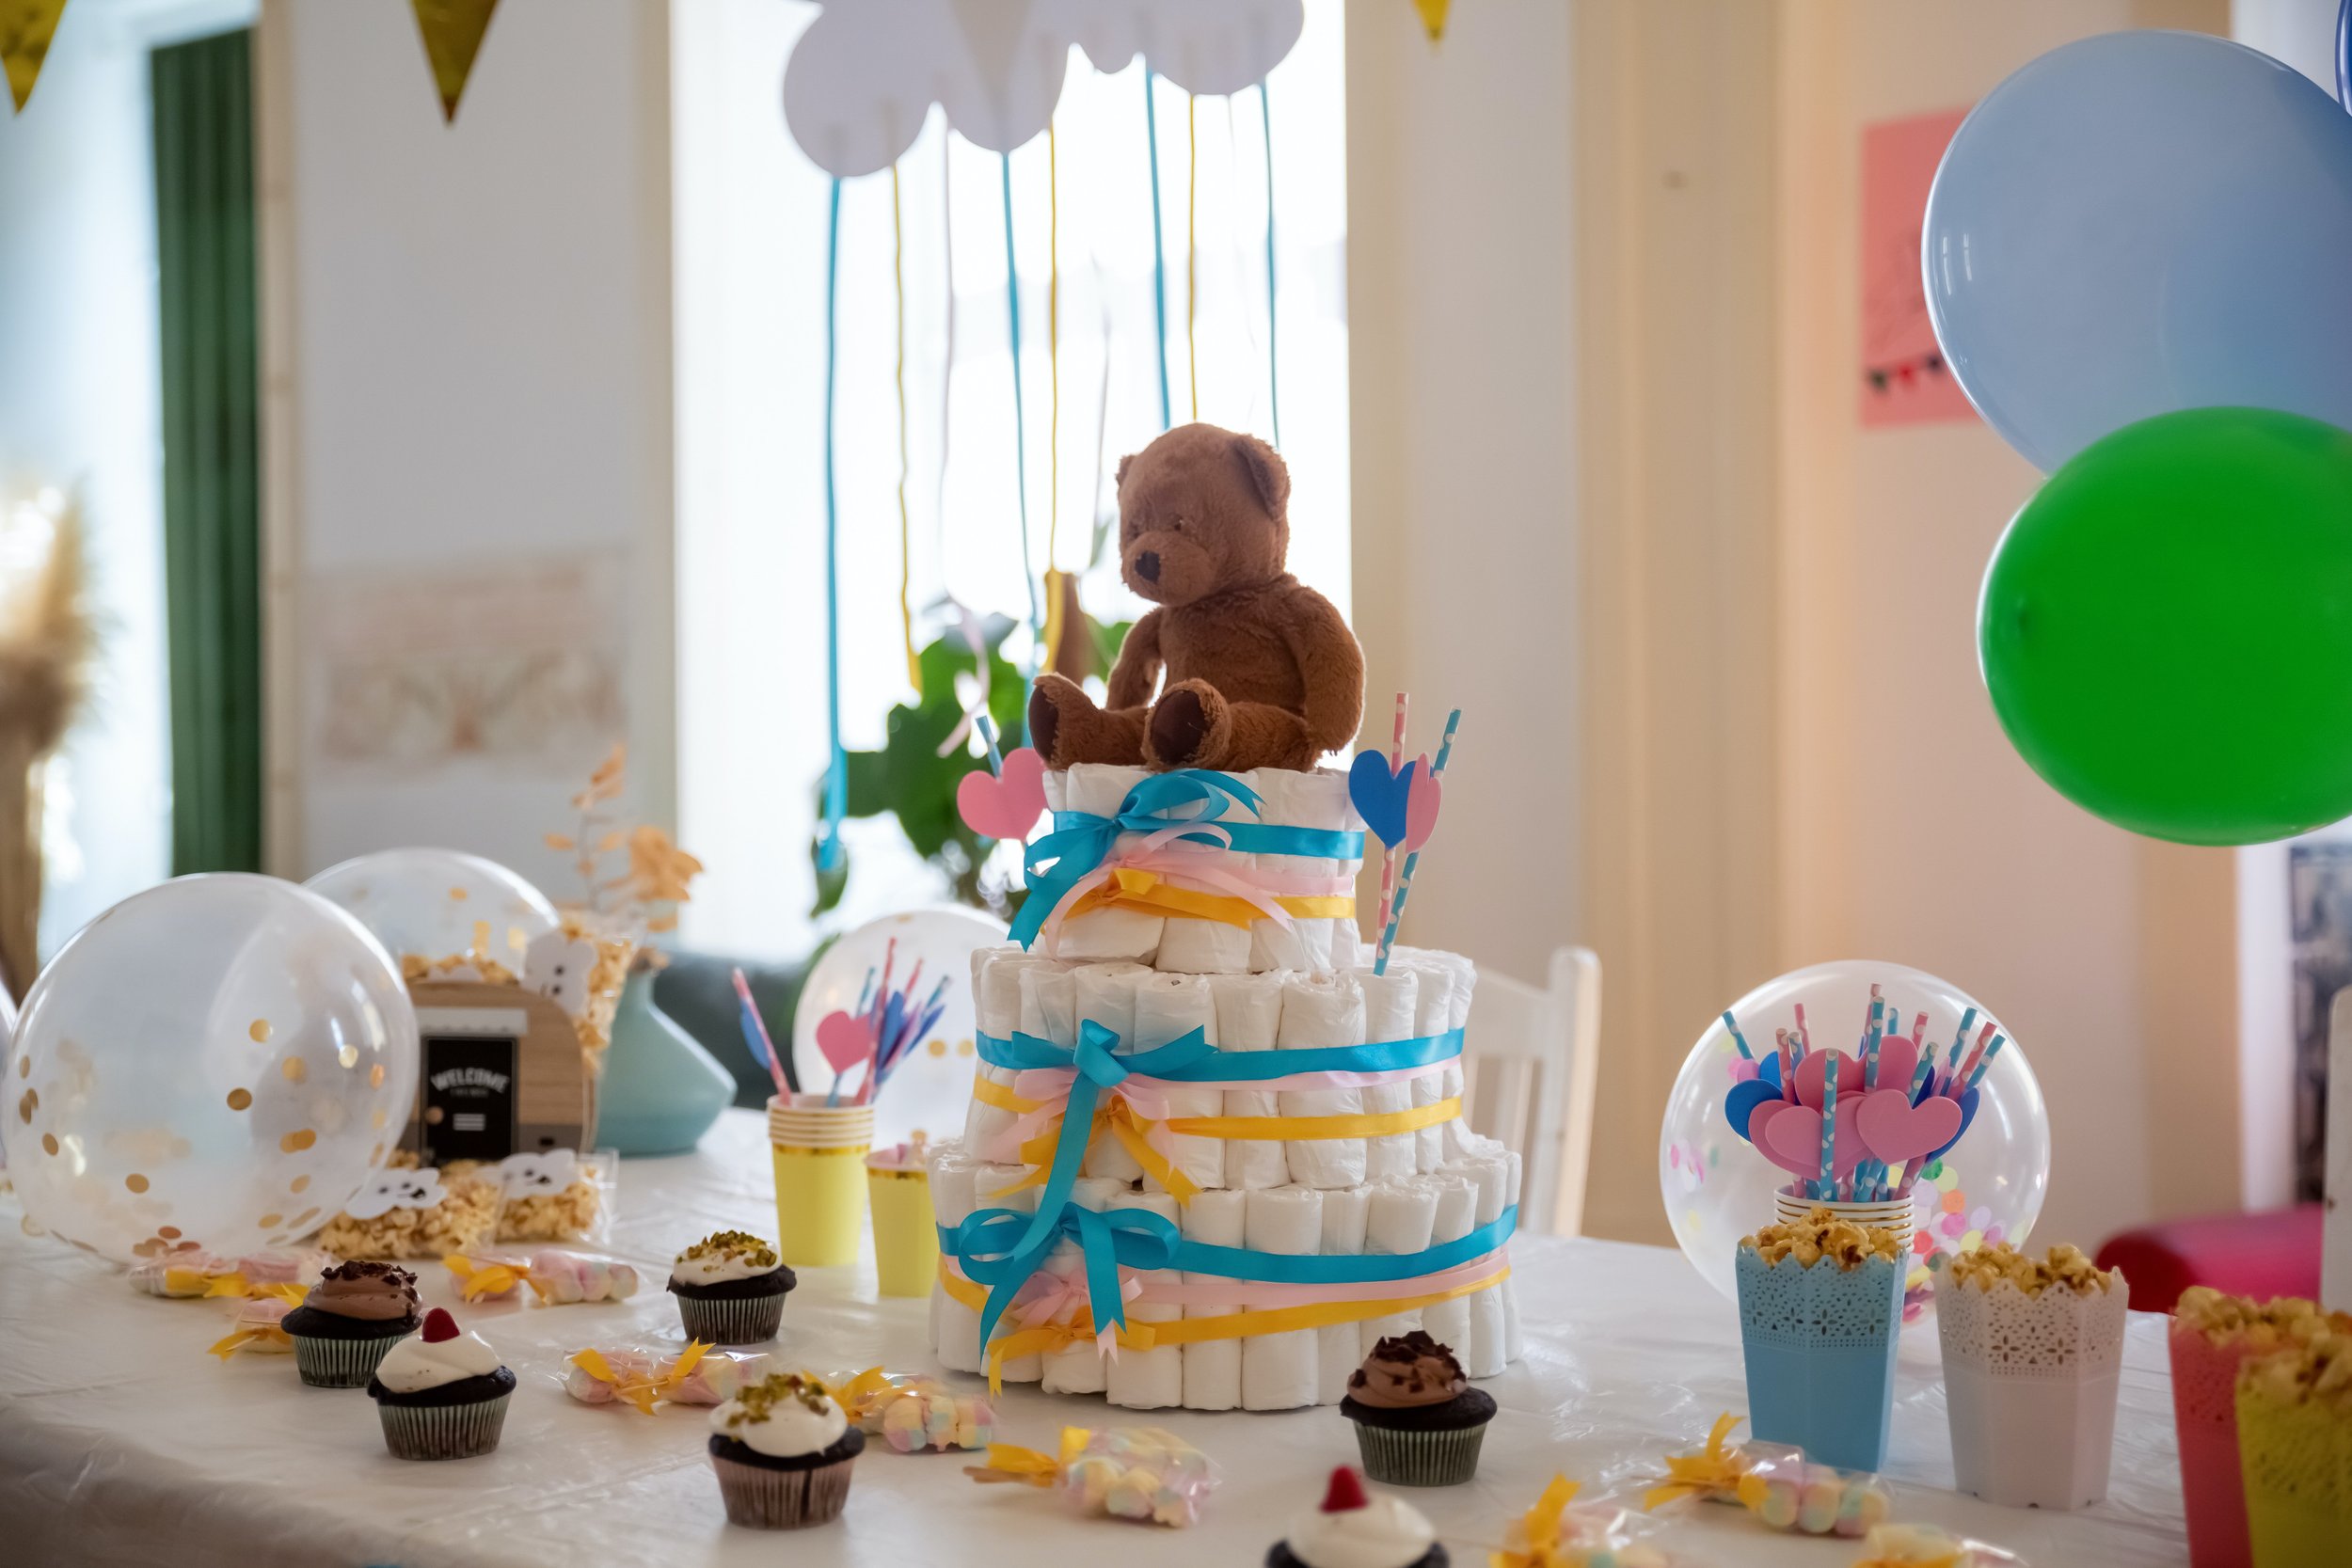 Plan a Baby Shower in Singapore: Gender Reveal Cake, Decor, Venue